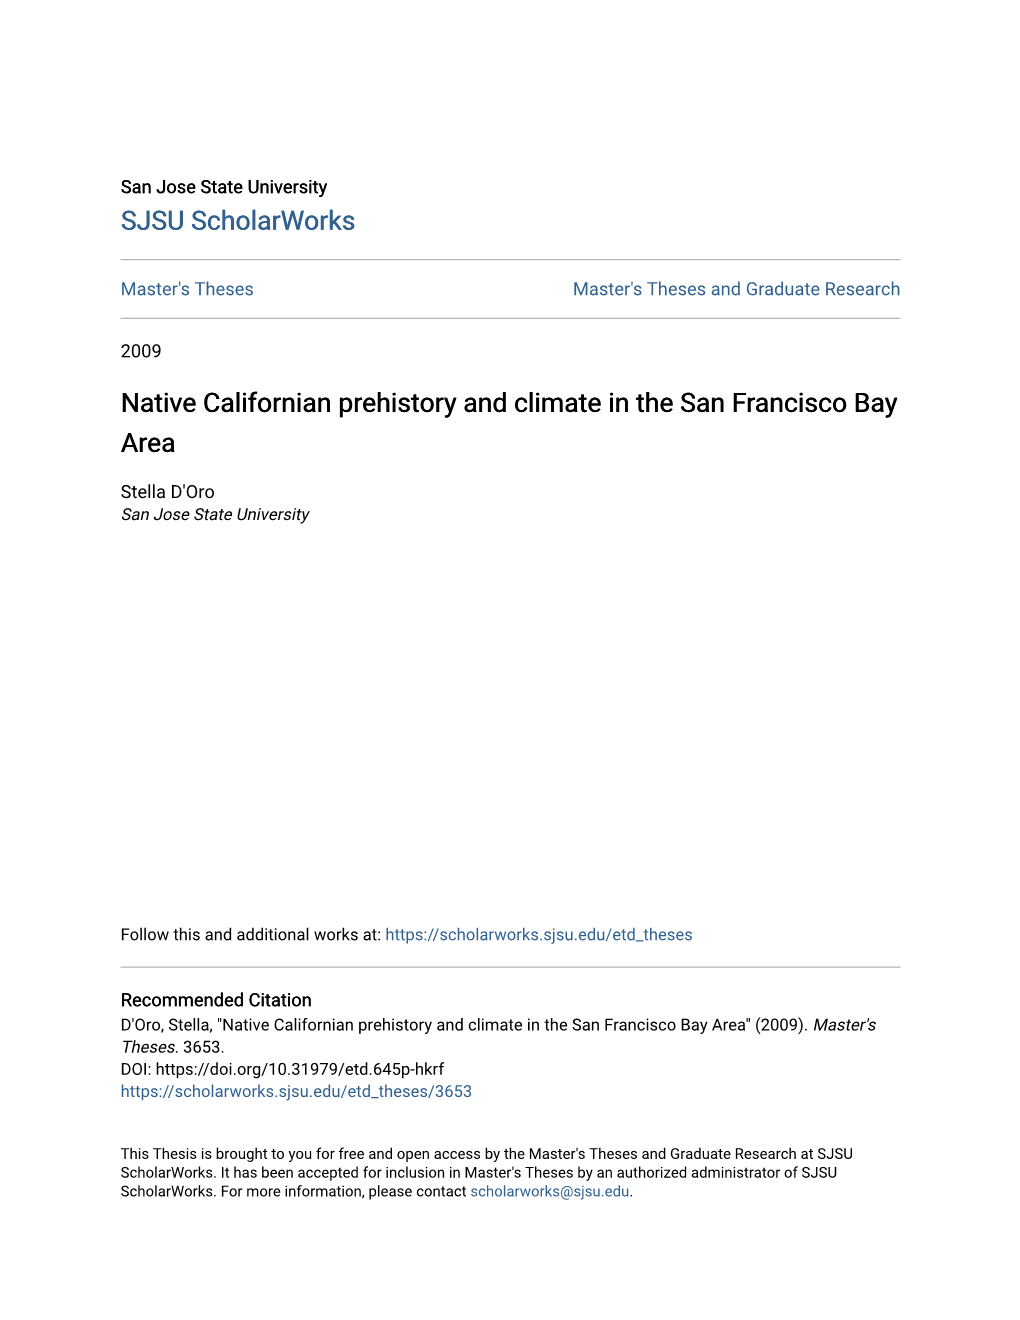 Native Californian Prehistory and Climate in the San Francisco Bay Area